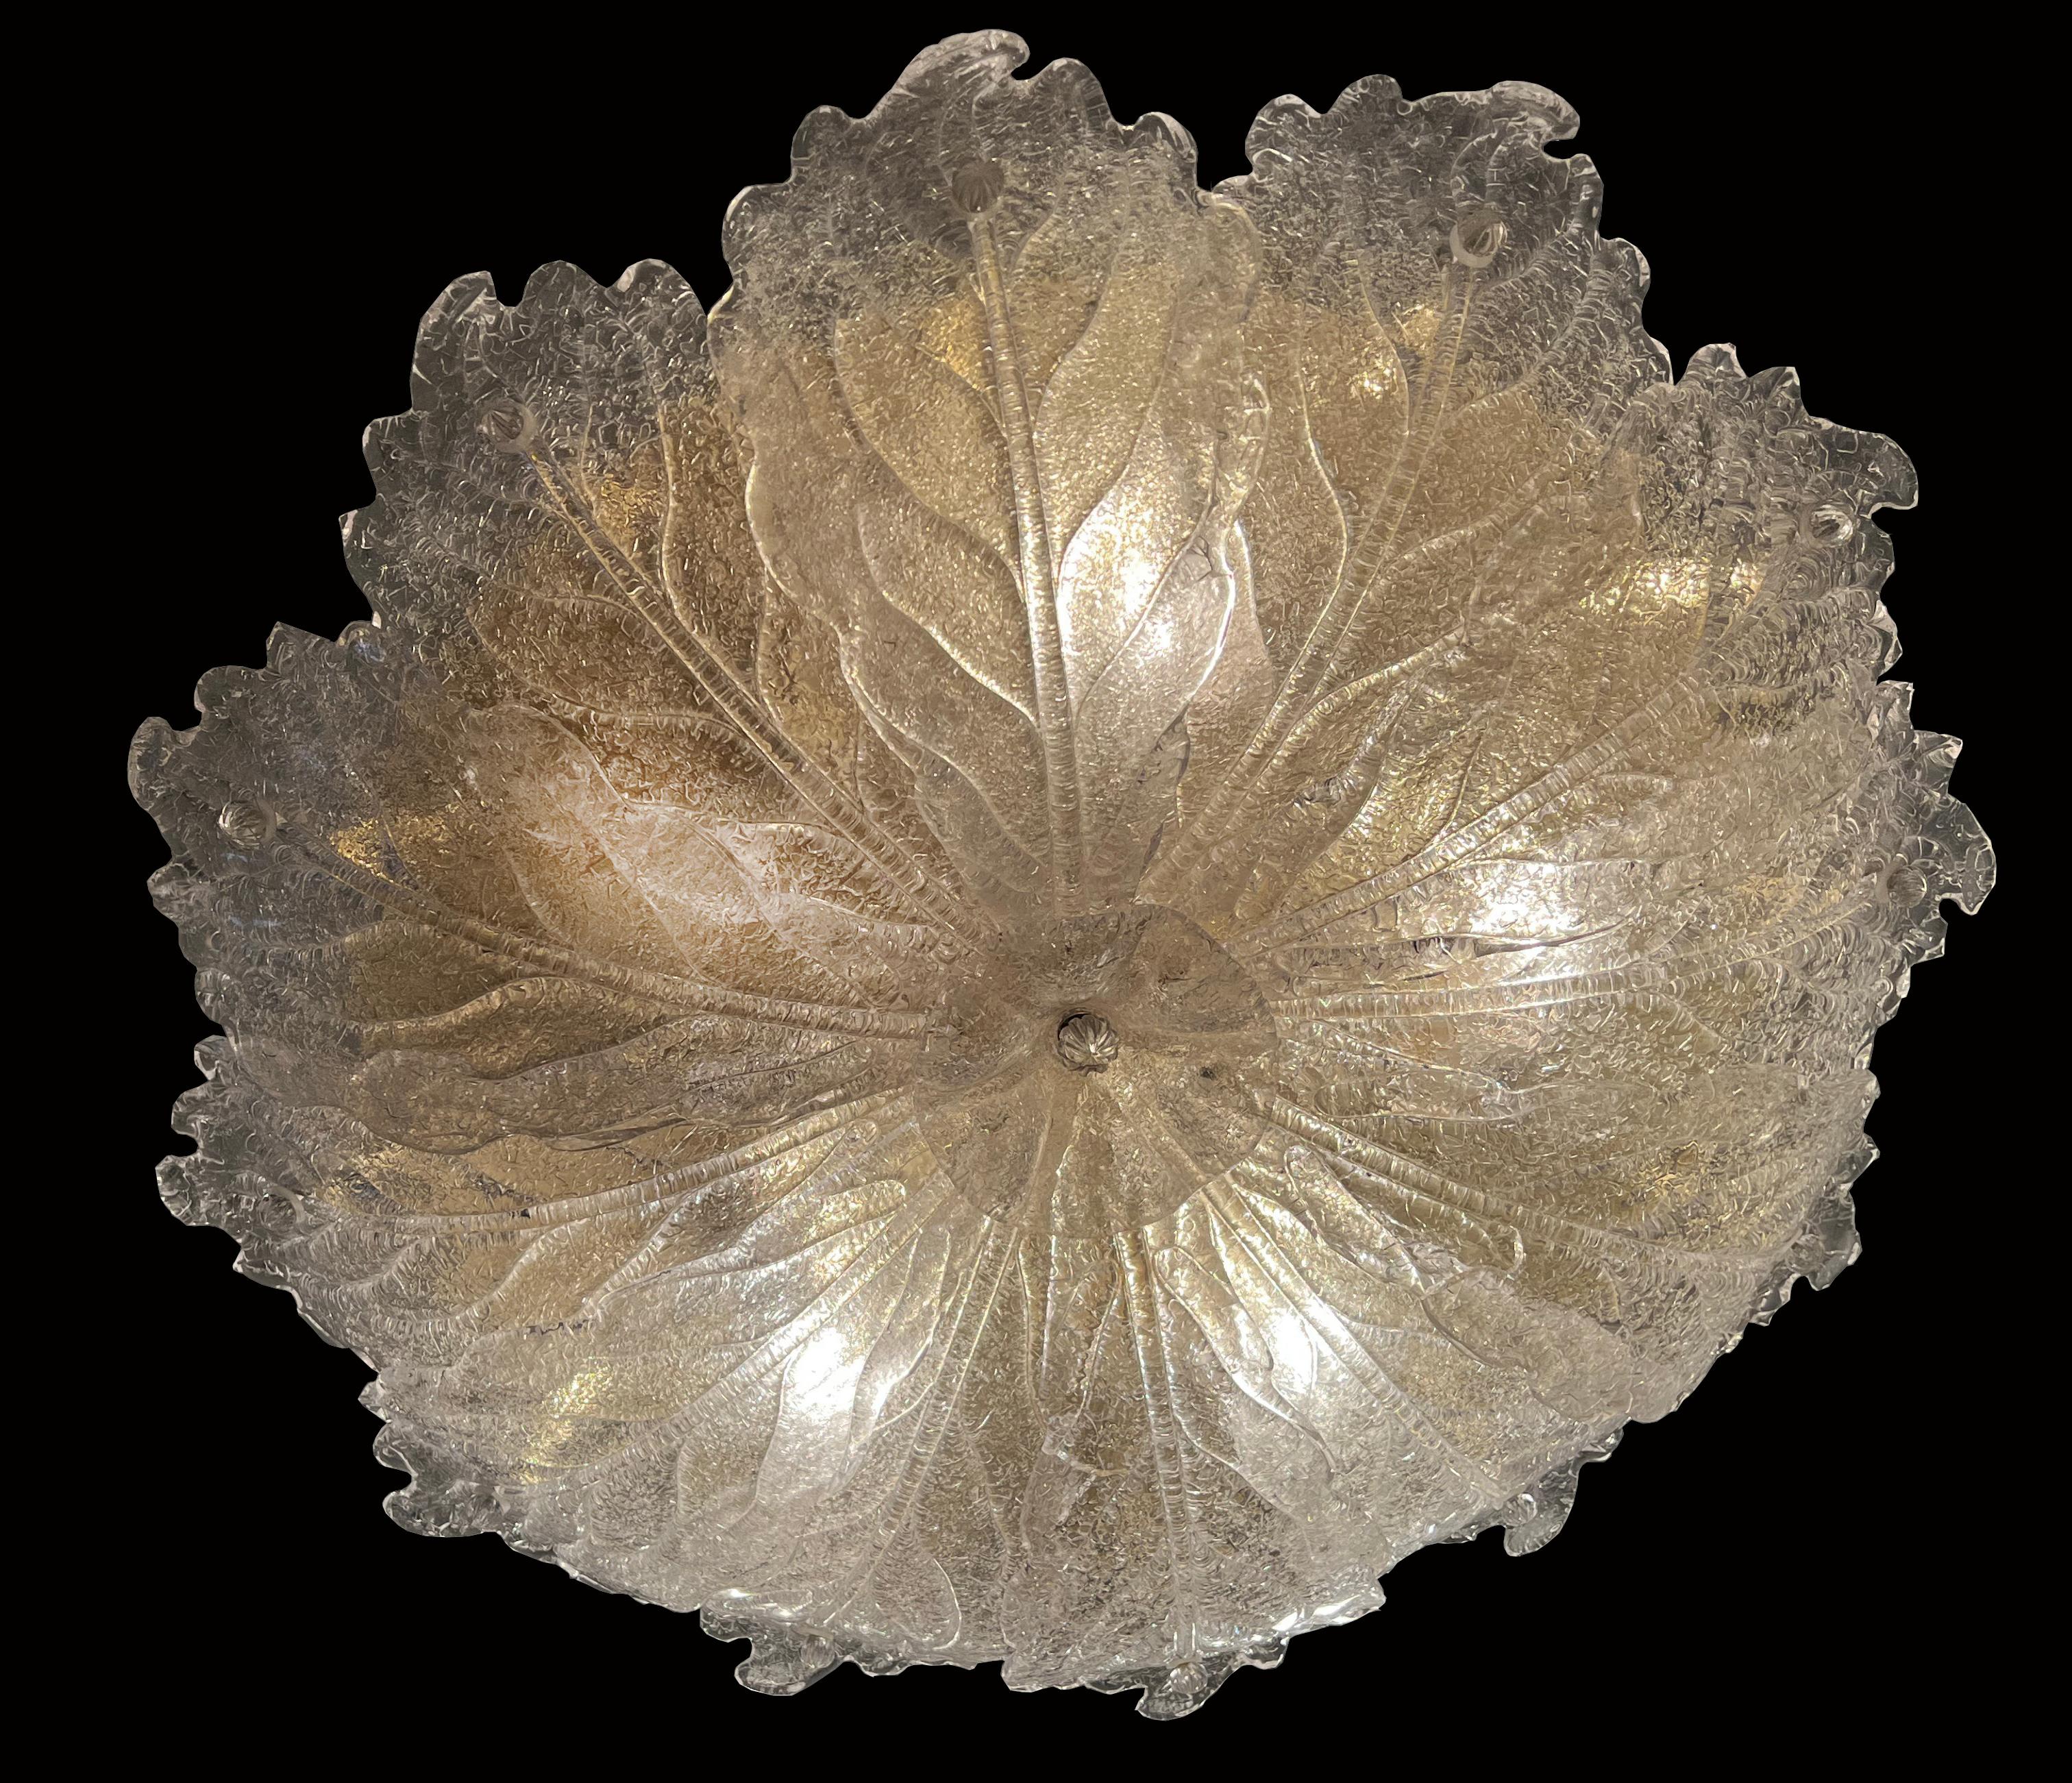 Luxury Barovier & Toso Venetian glass ceiling formed by 12 large leaves in pure ice-colored 